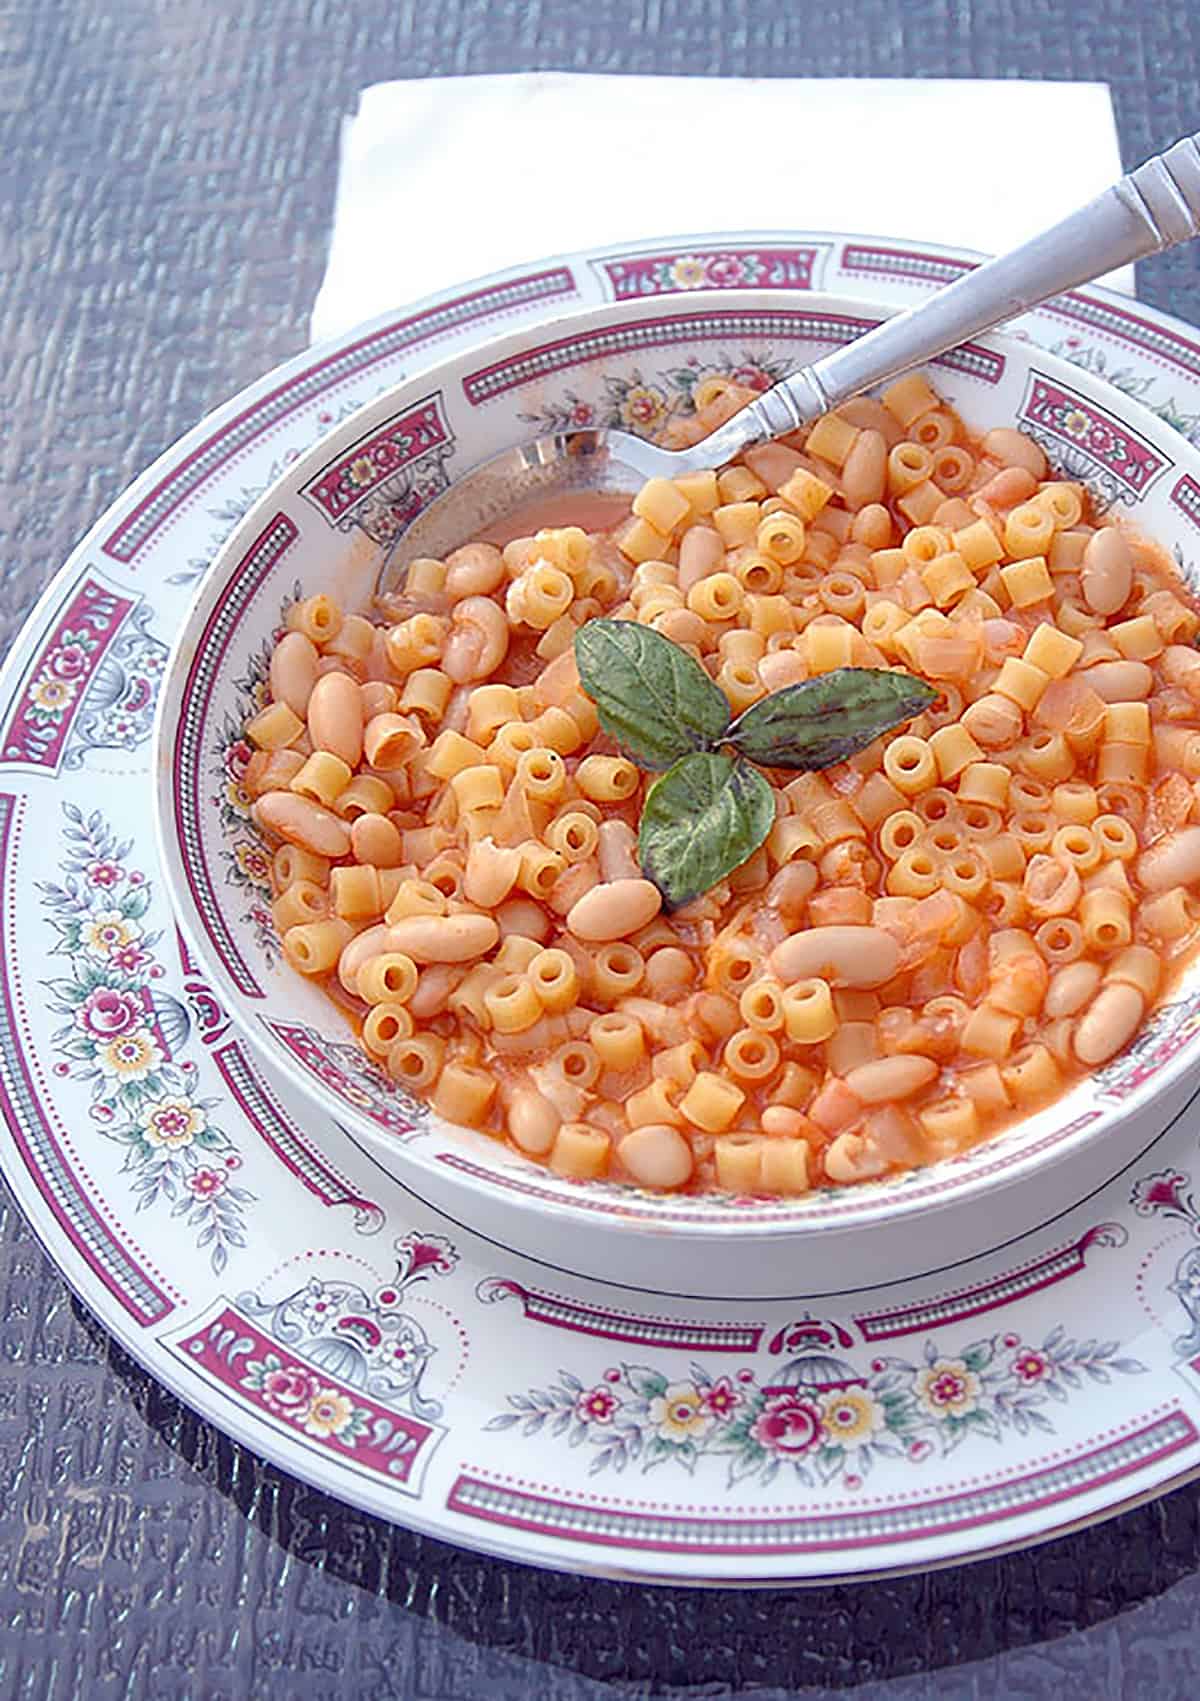 AUTHENTIC PASTA E FAGIOLI (VEGETARIAN) STORY - Cooking with Mamma C